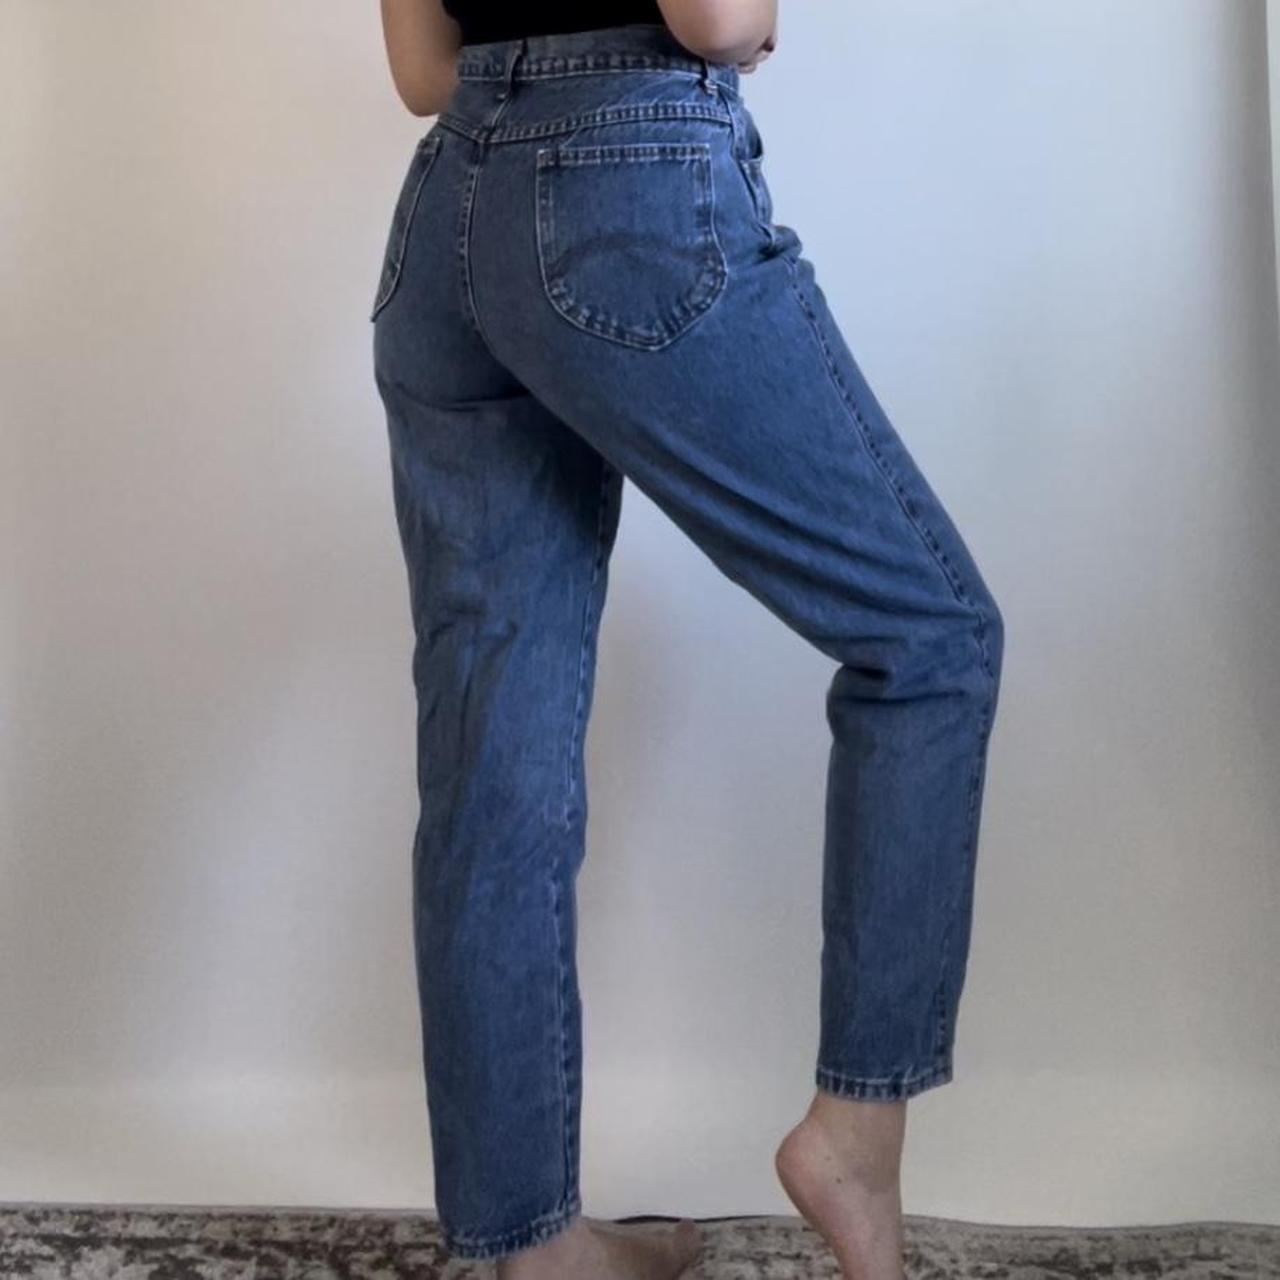 Chic Women's Blue and Navy Jeans (6)